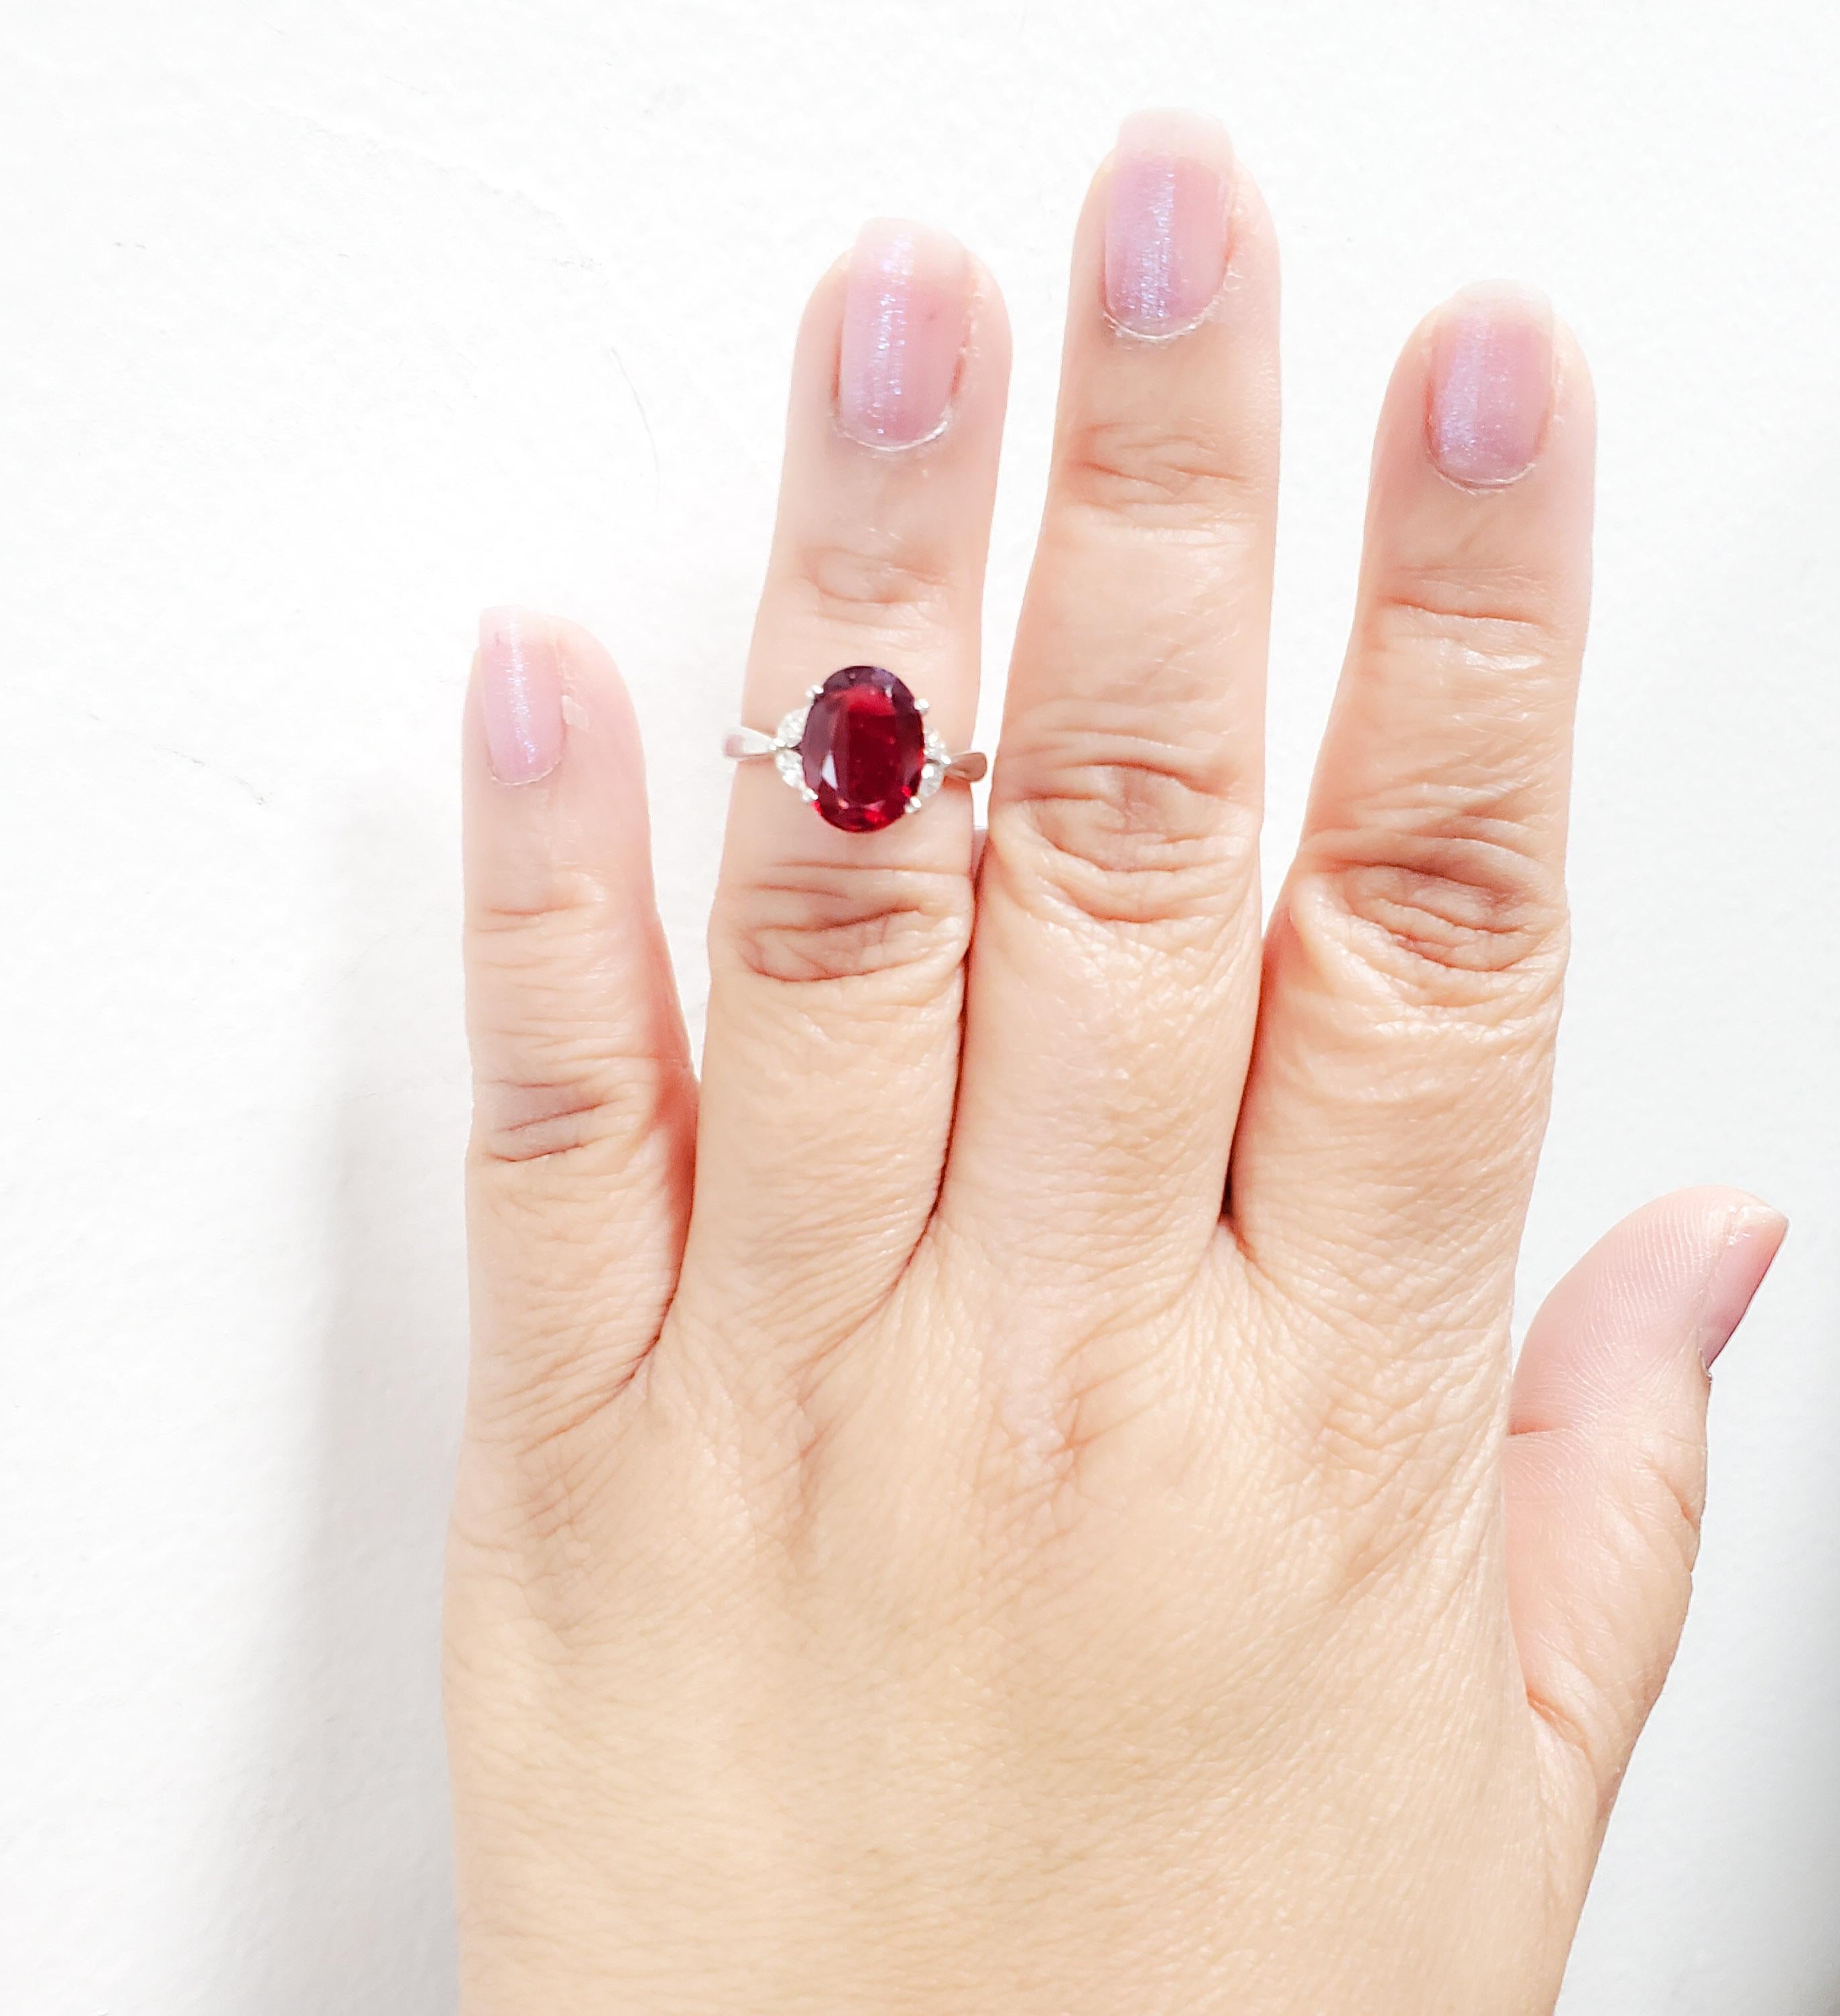 Beautiful 3.55 ct. red spinel oval with 0.23 ct. white diamond marquise shapes.  Handmade in platinum.  Ring size 6.25.